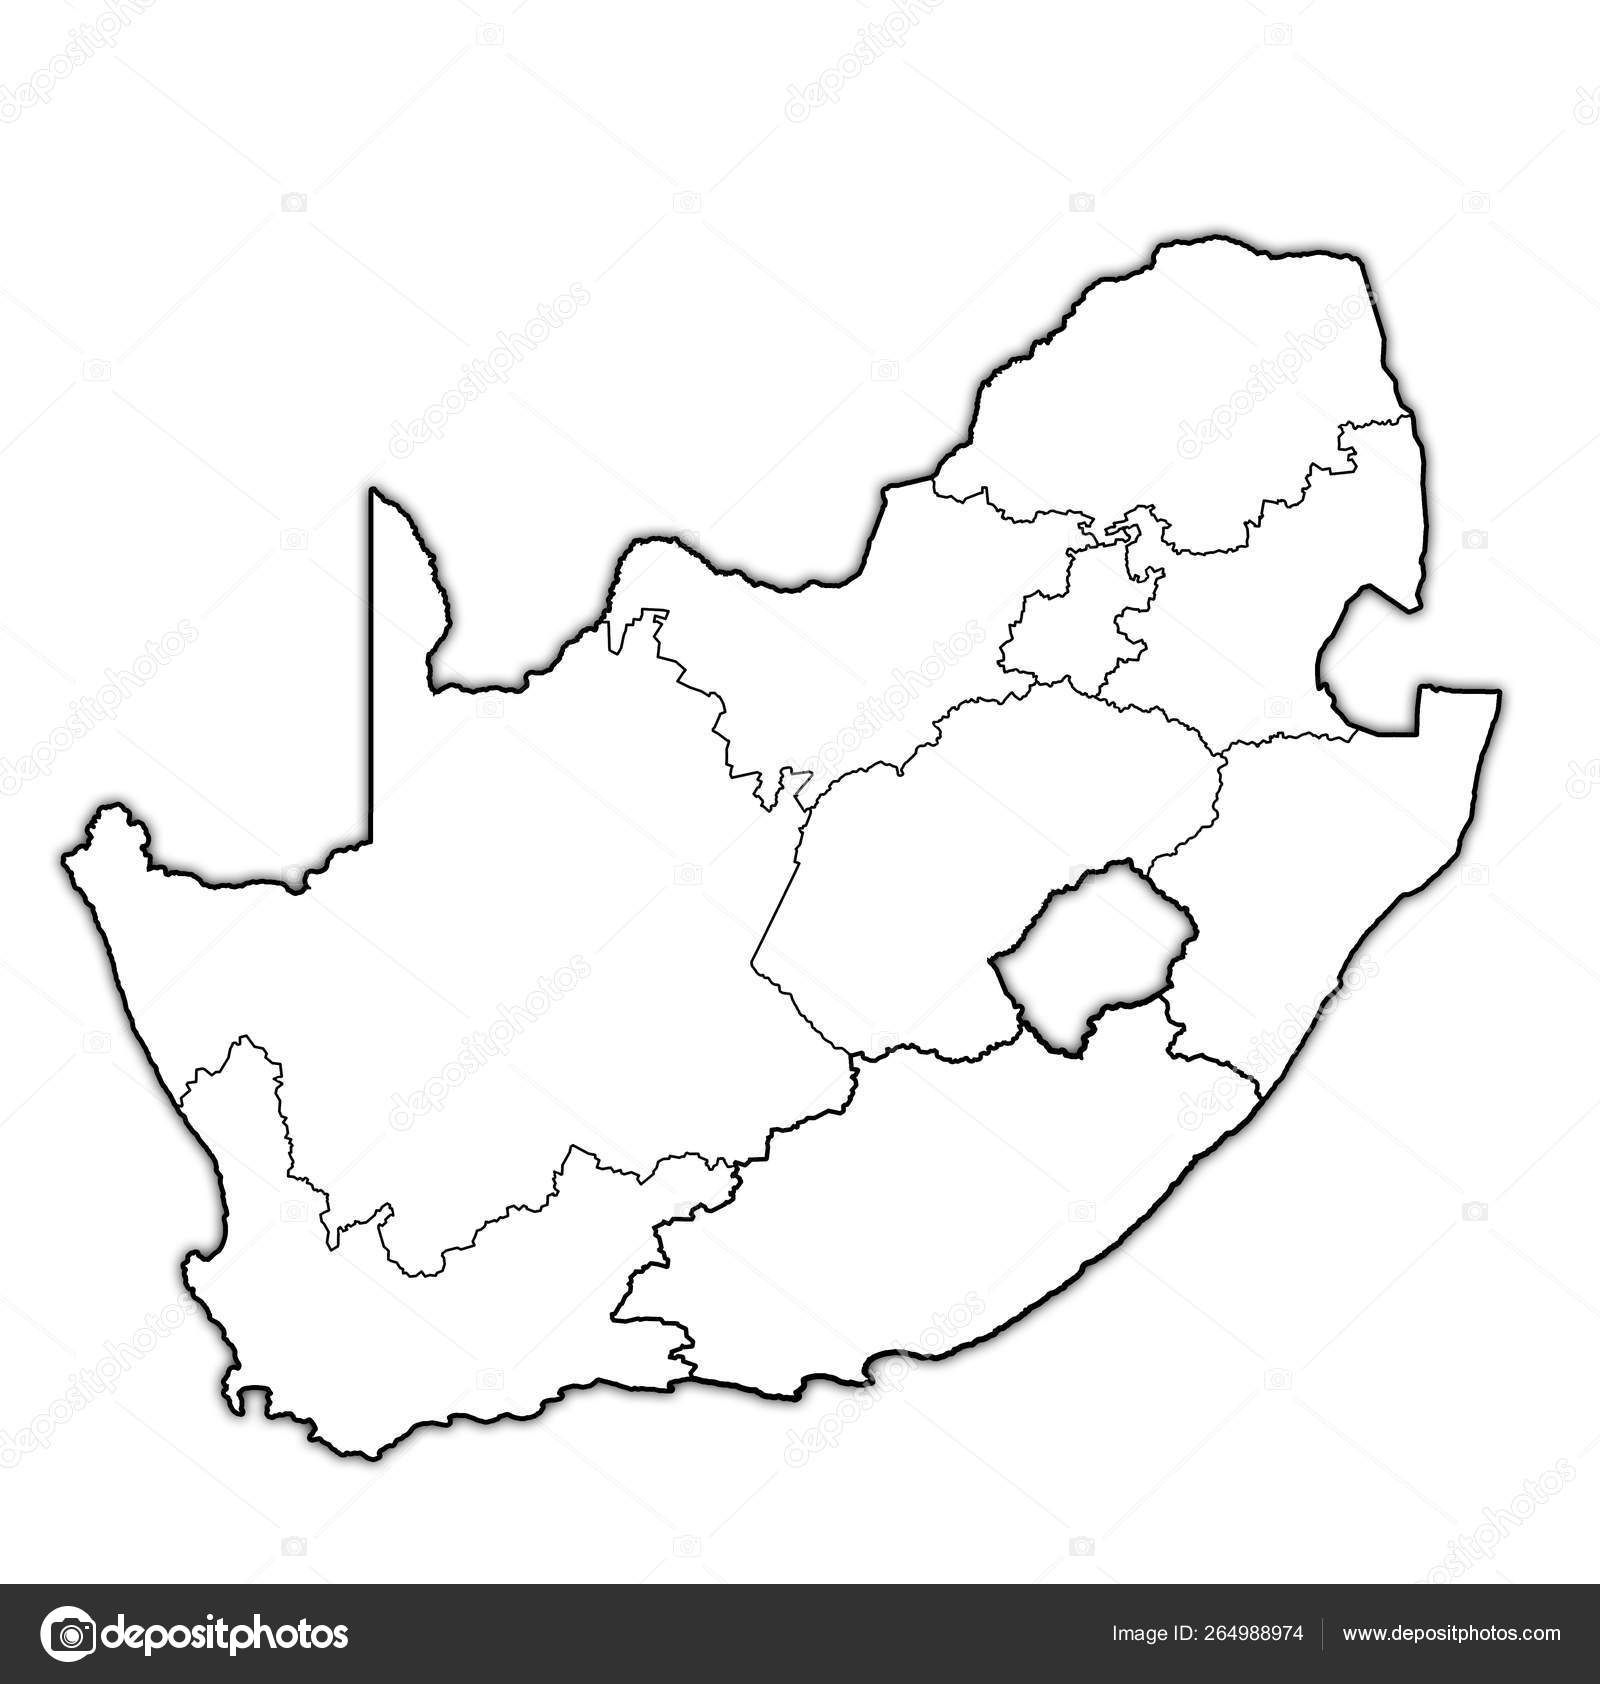 Outline Of Administration Map Of South Africa Stock Photo